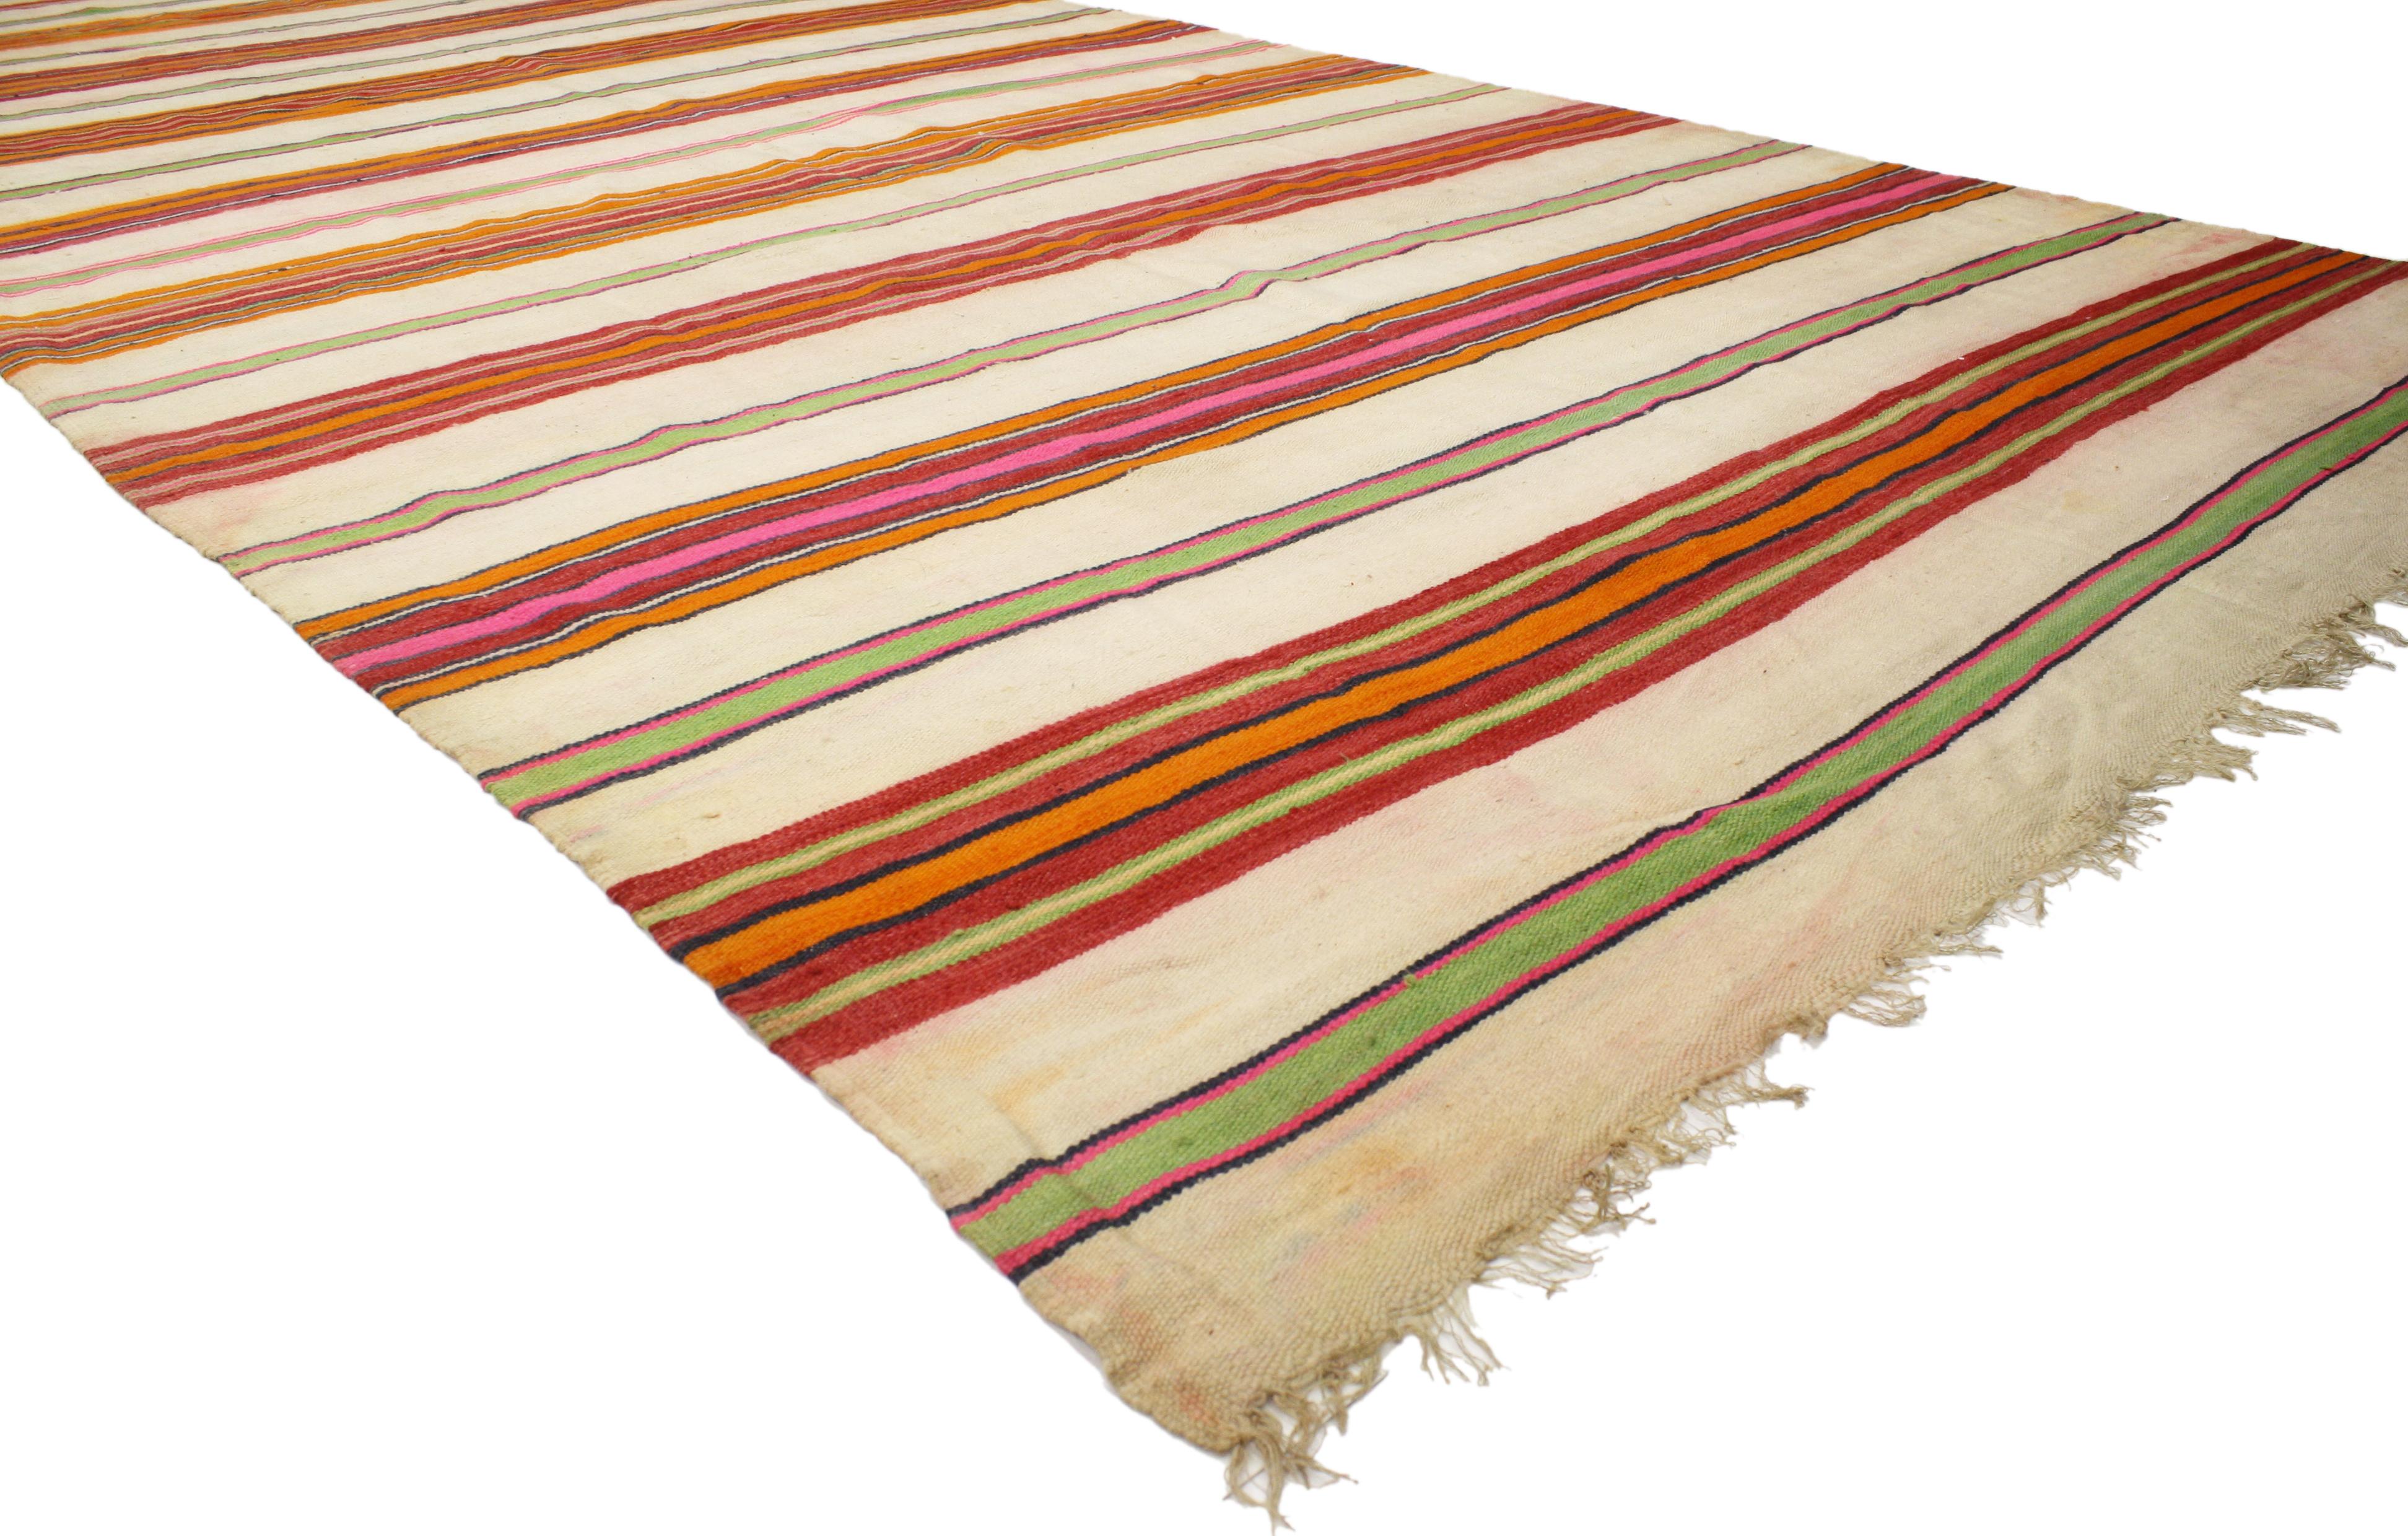 20th Century Vintage Berber Moroccan Striped Kilim Rug with Tribal Boho Chic Style For Sale